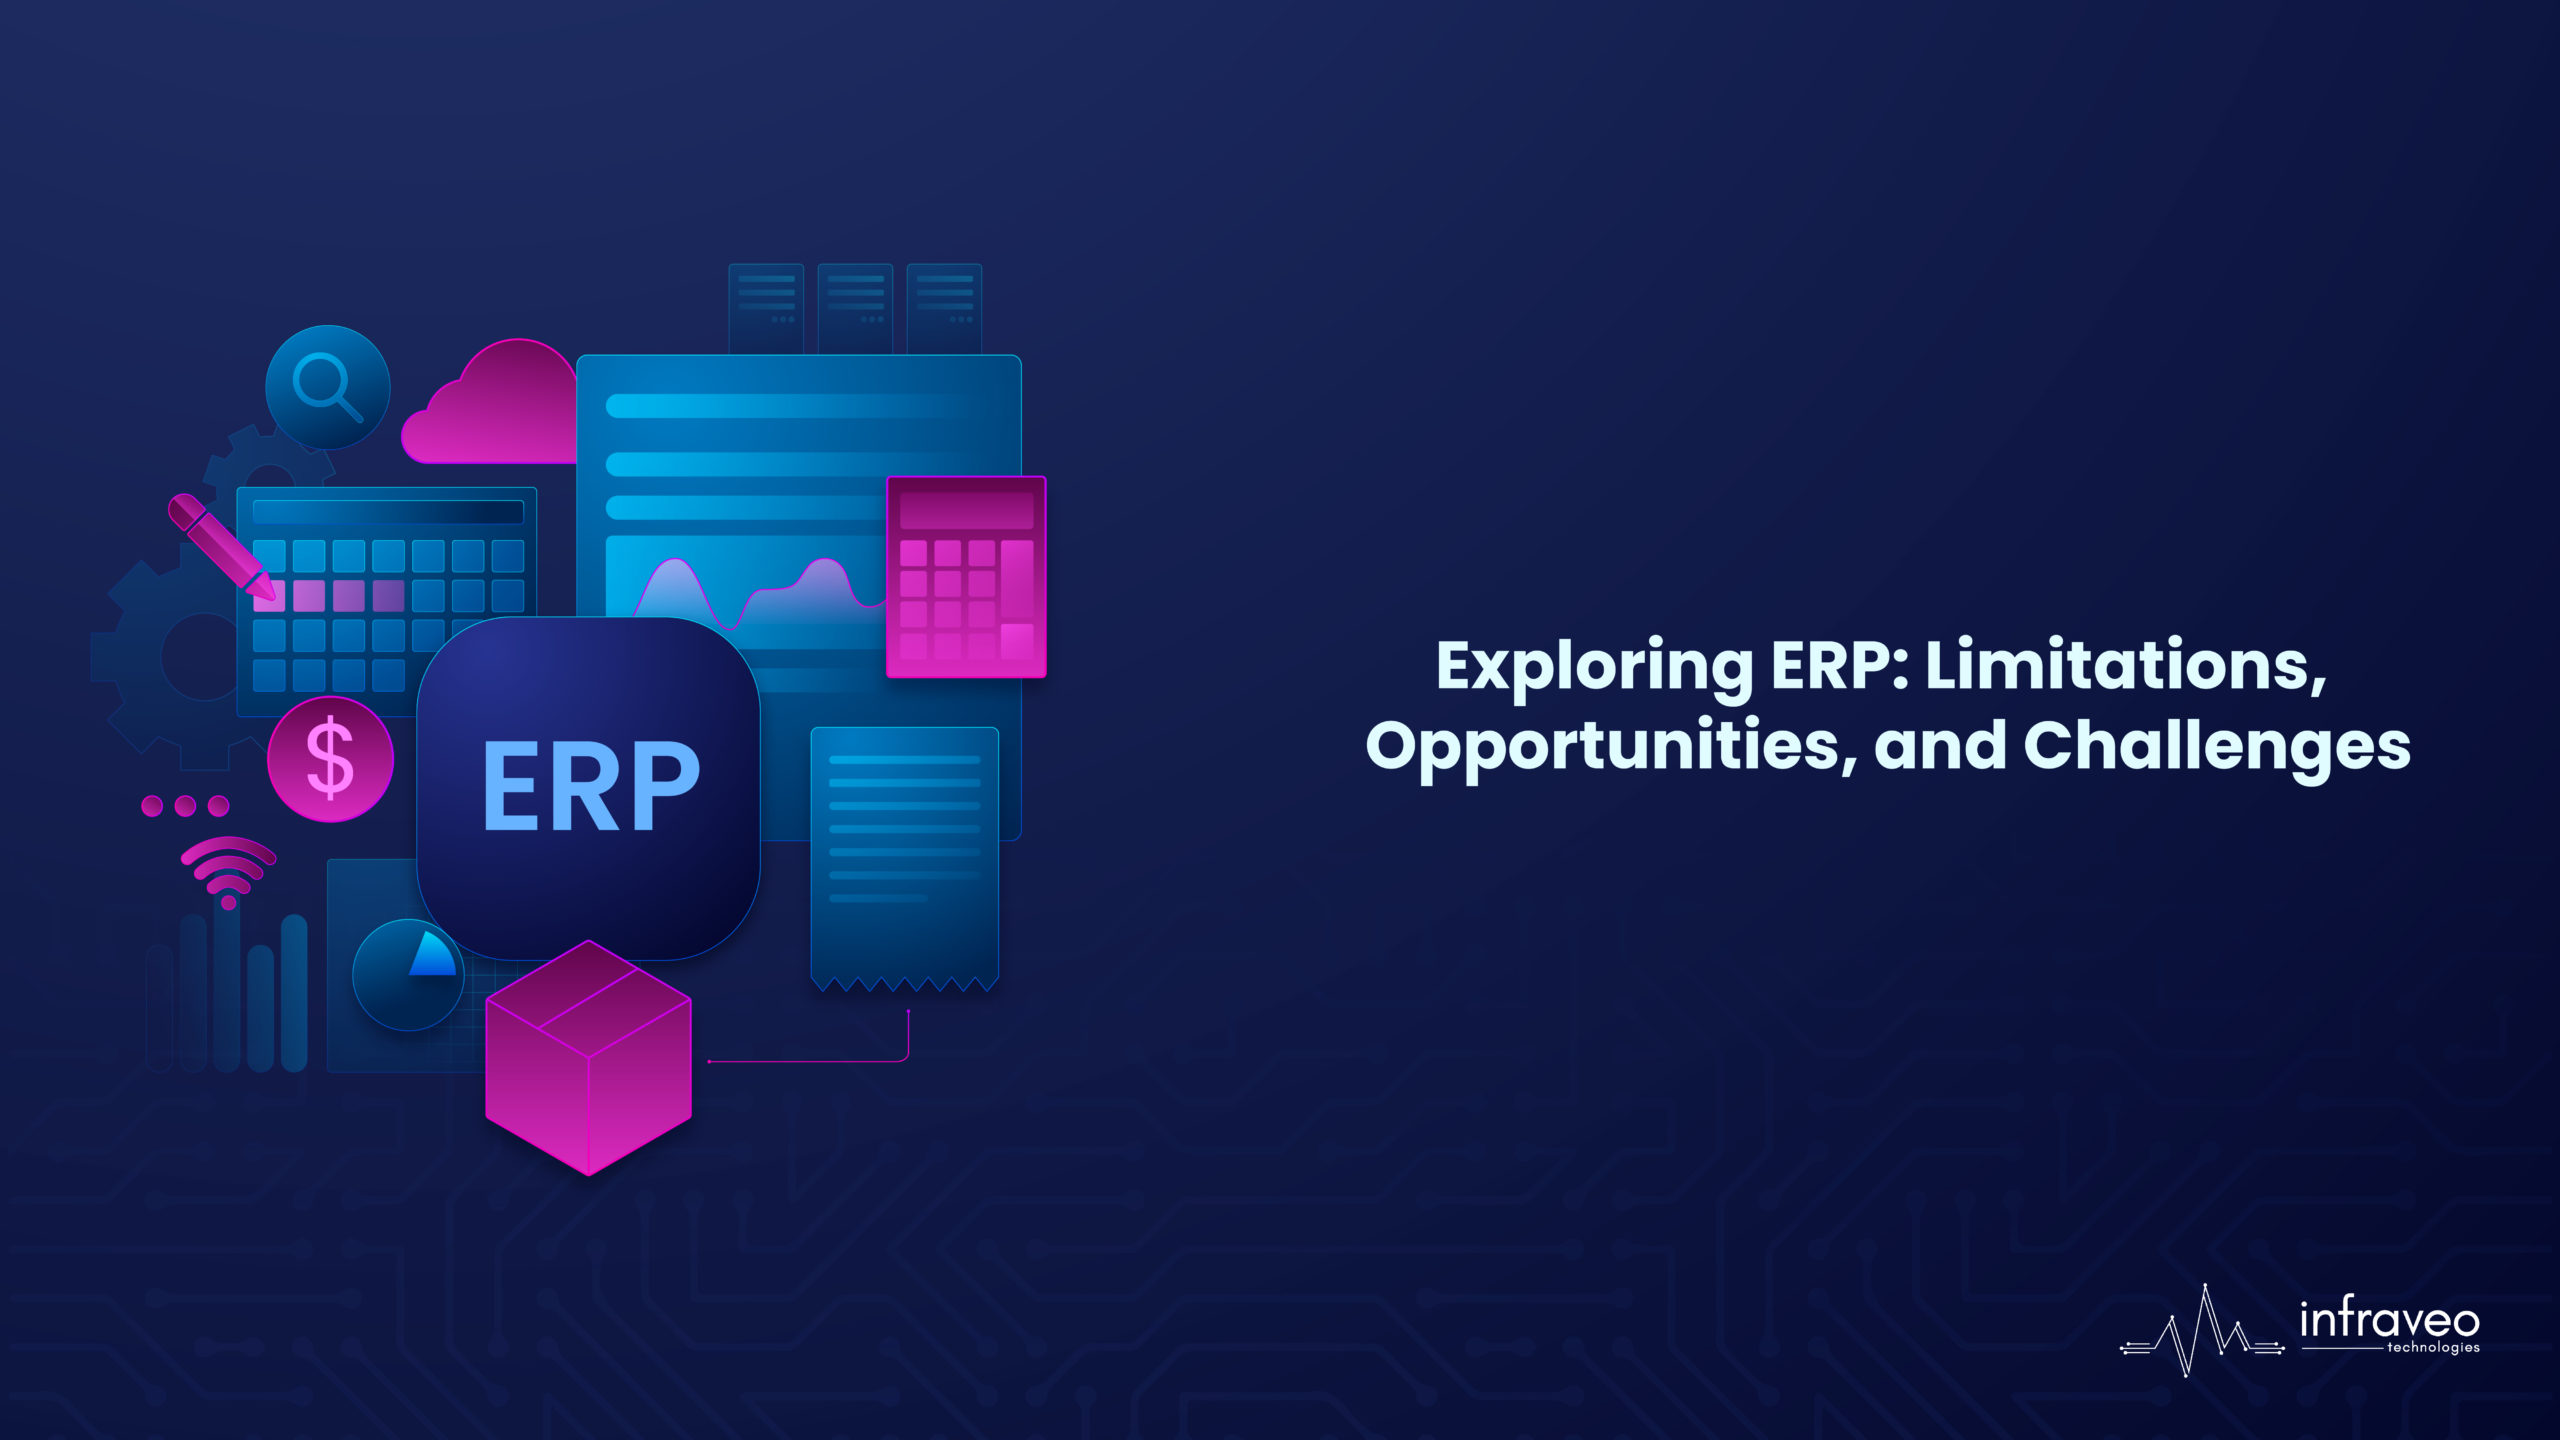 Complexities of ERP - Navigating the Complexities of ERP: Exploring the Limitations, Opportunities, and Challenges